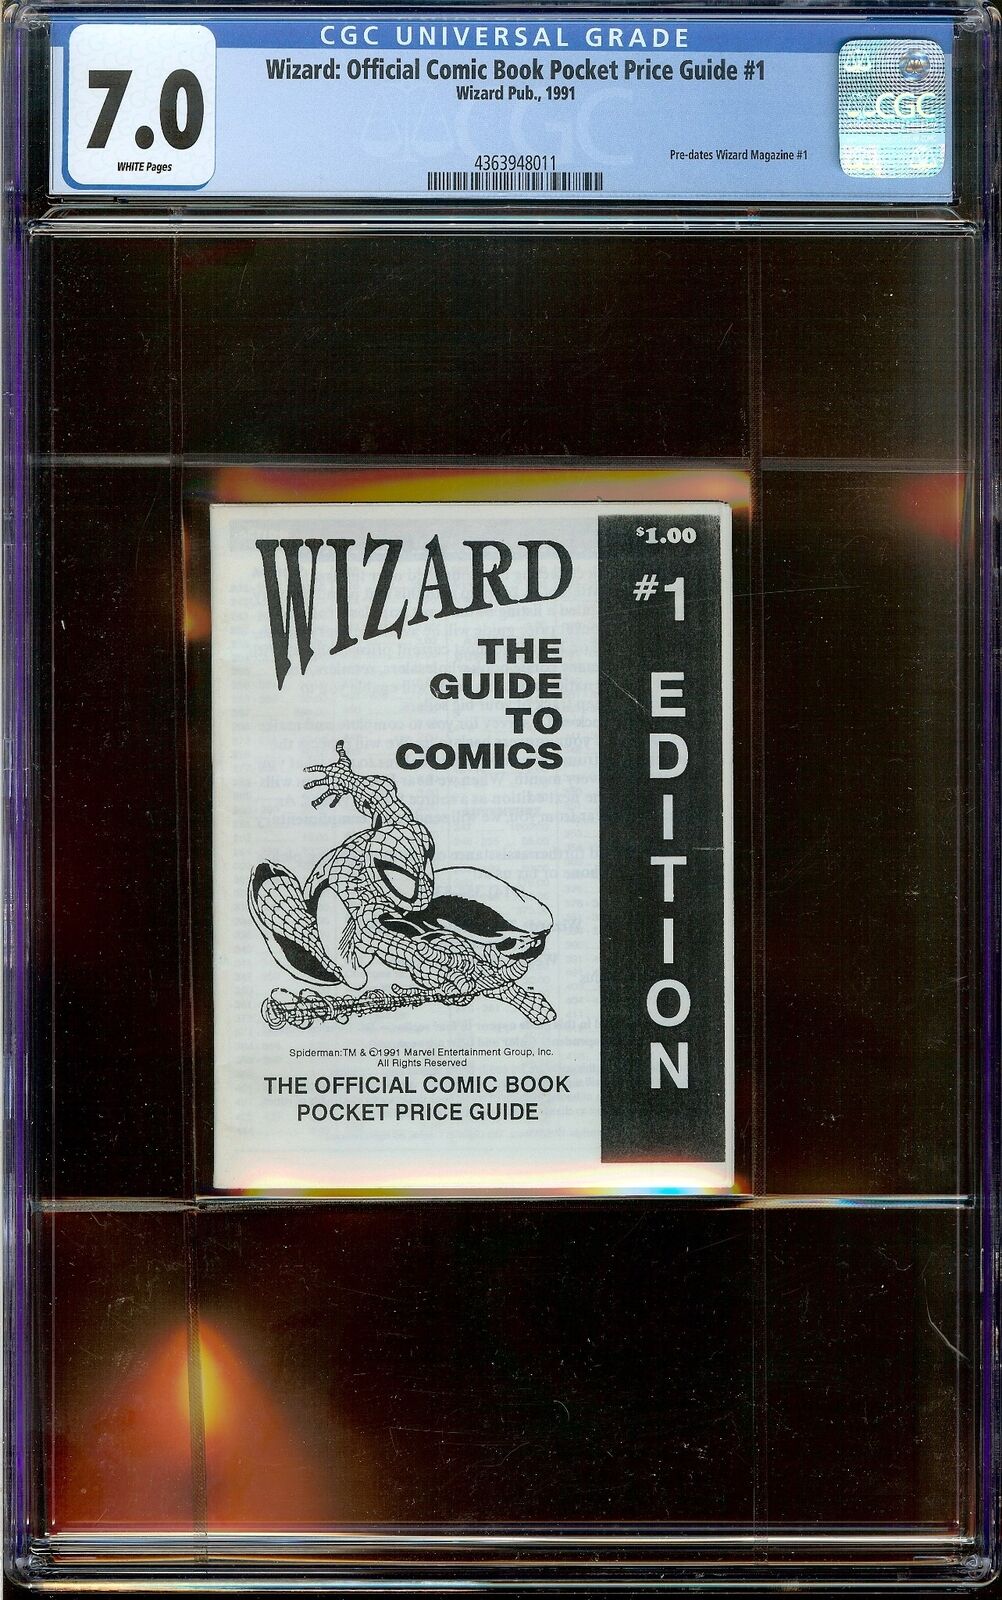 Wizard: Official Comic Book Pocket Price Guide #1 CGC 7.0 WP Scarce Pre-Dates #1